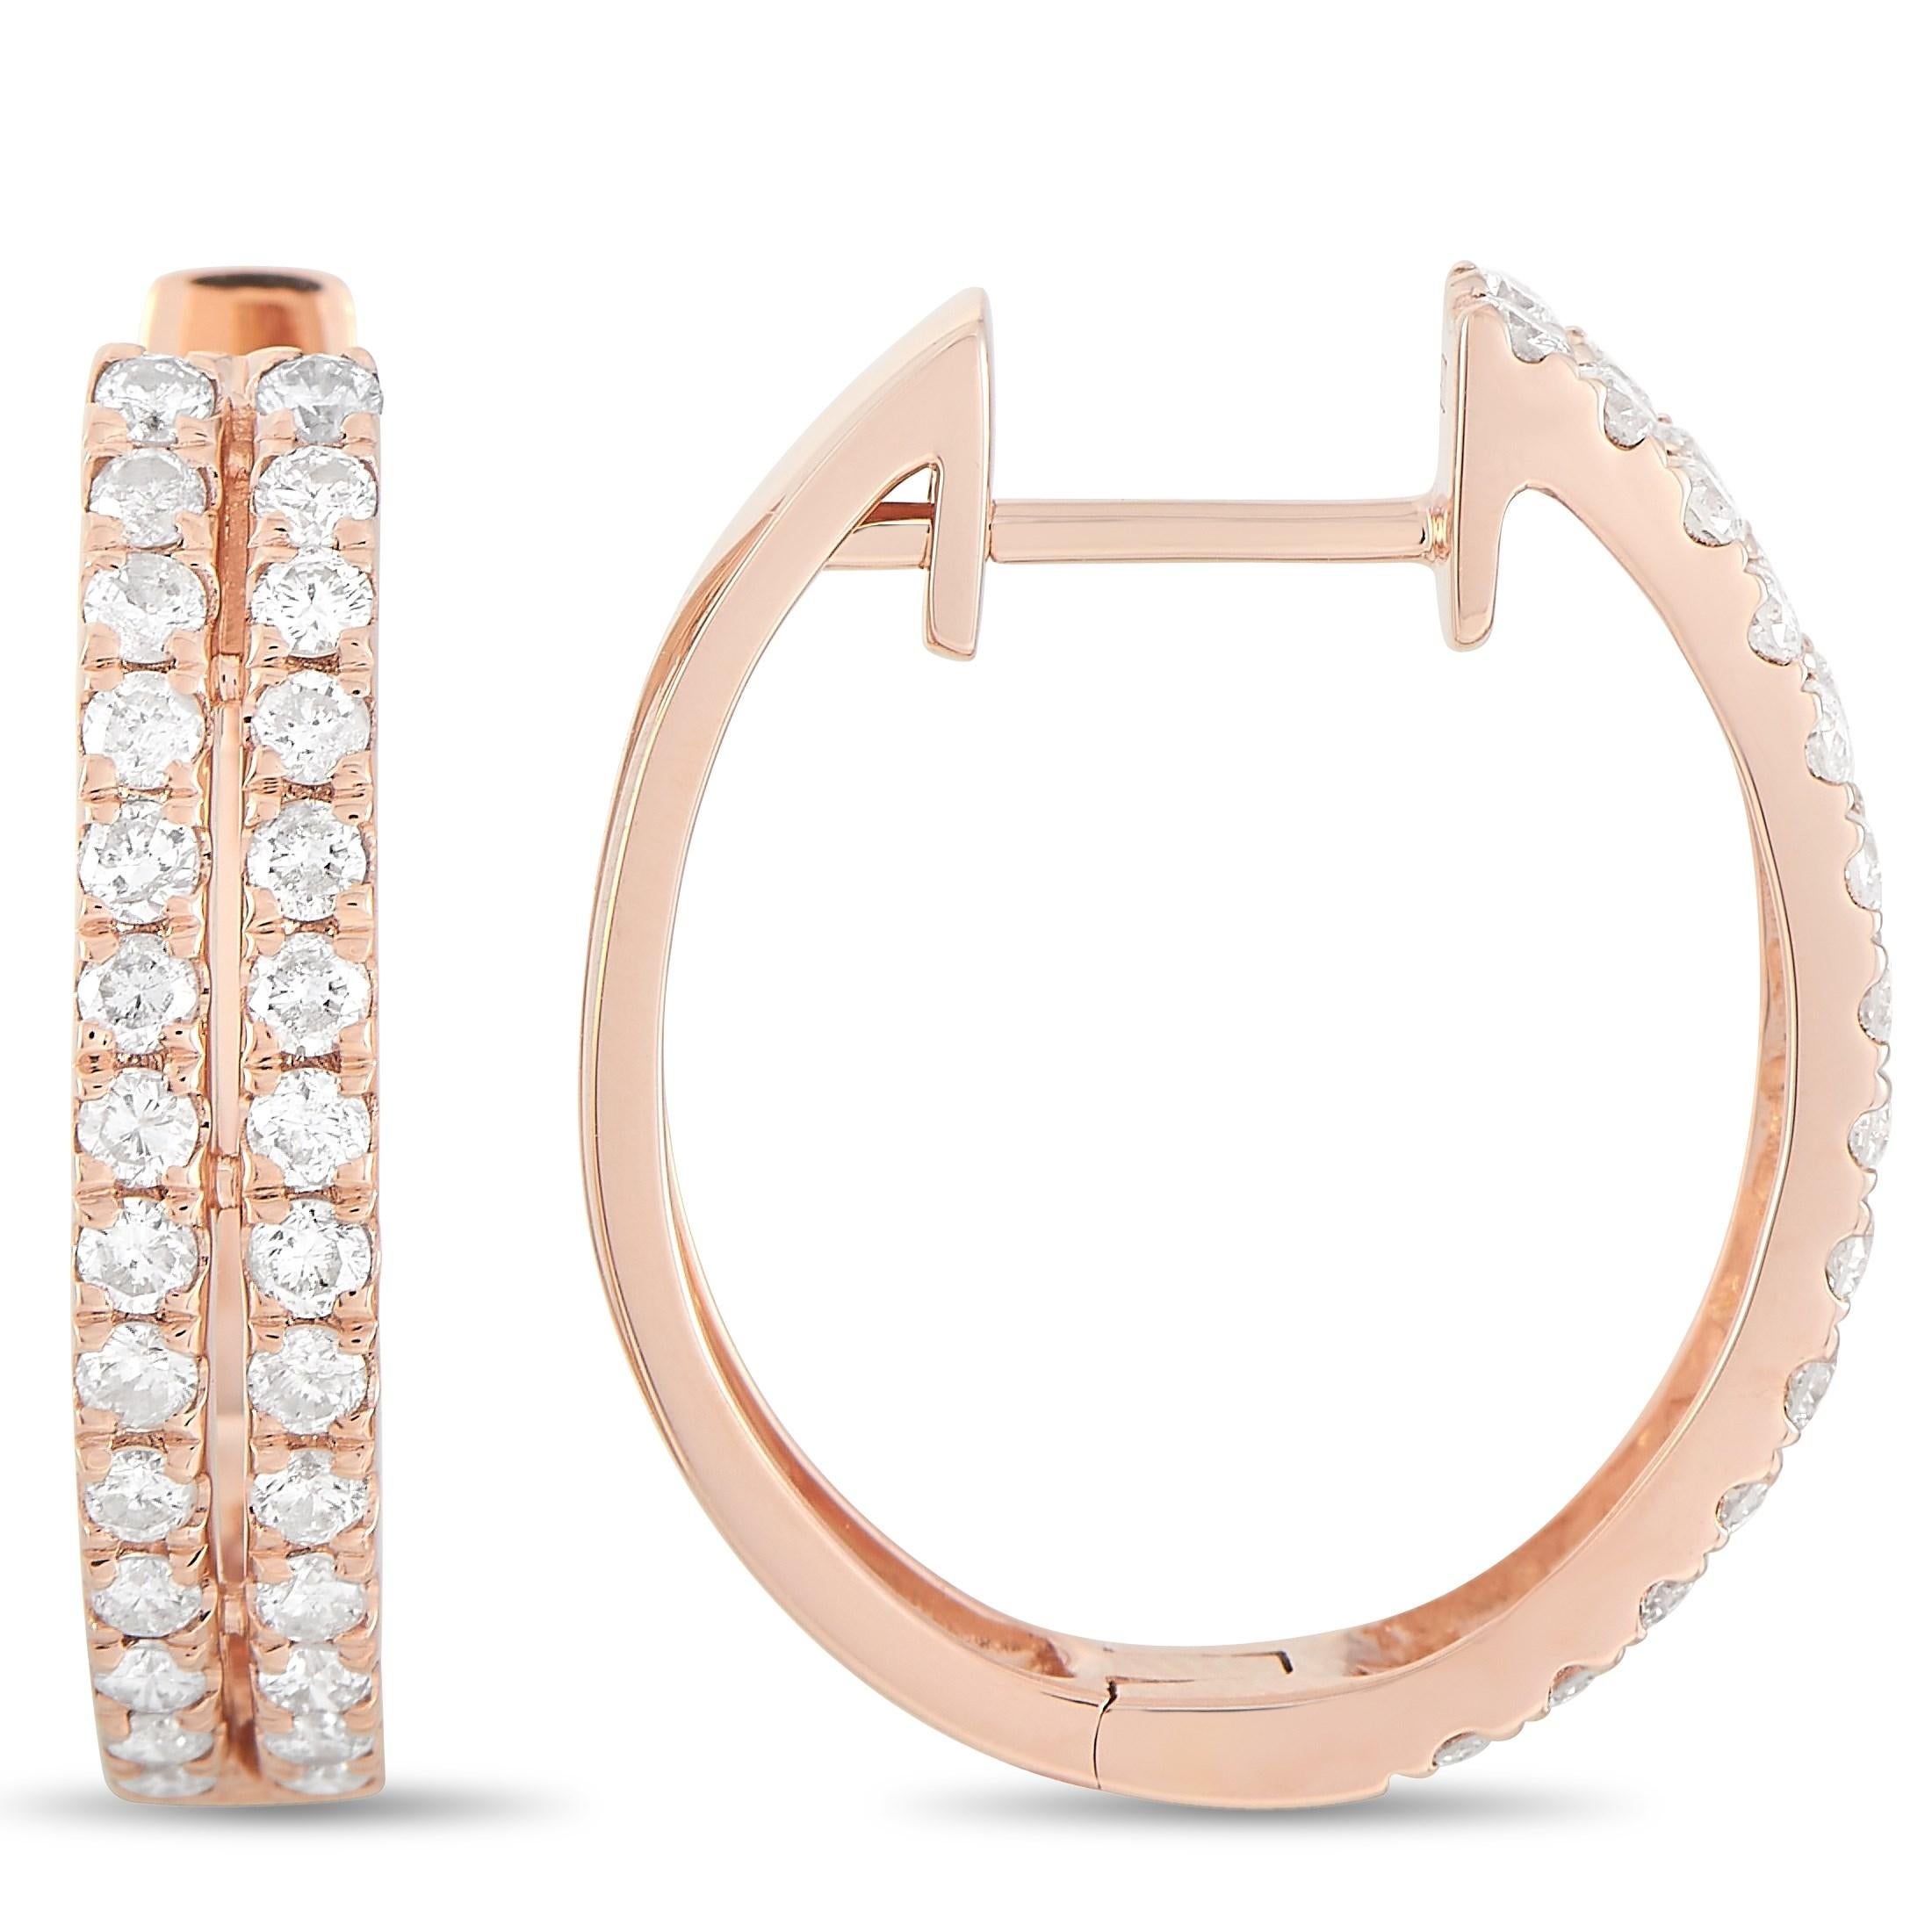 Ready to lend a sophisticated touch to your outfits is this pair of diamond hoop earrings. The LB Exclusive 14K Rose Gold 1.00 ct Diamond Hoop Earrings features two glittering rows of diamonds set on a polished rosy hoop. These ear jewels secure